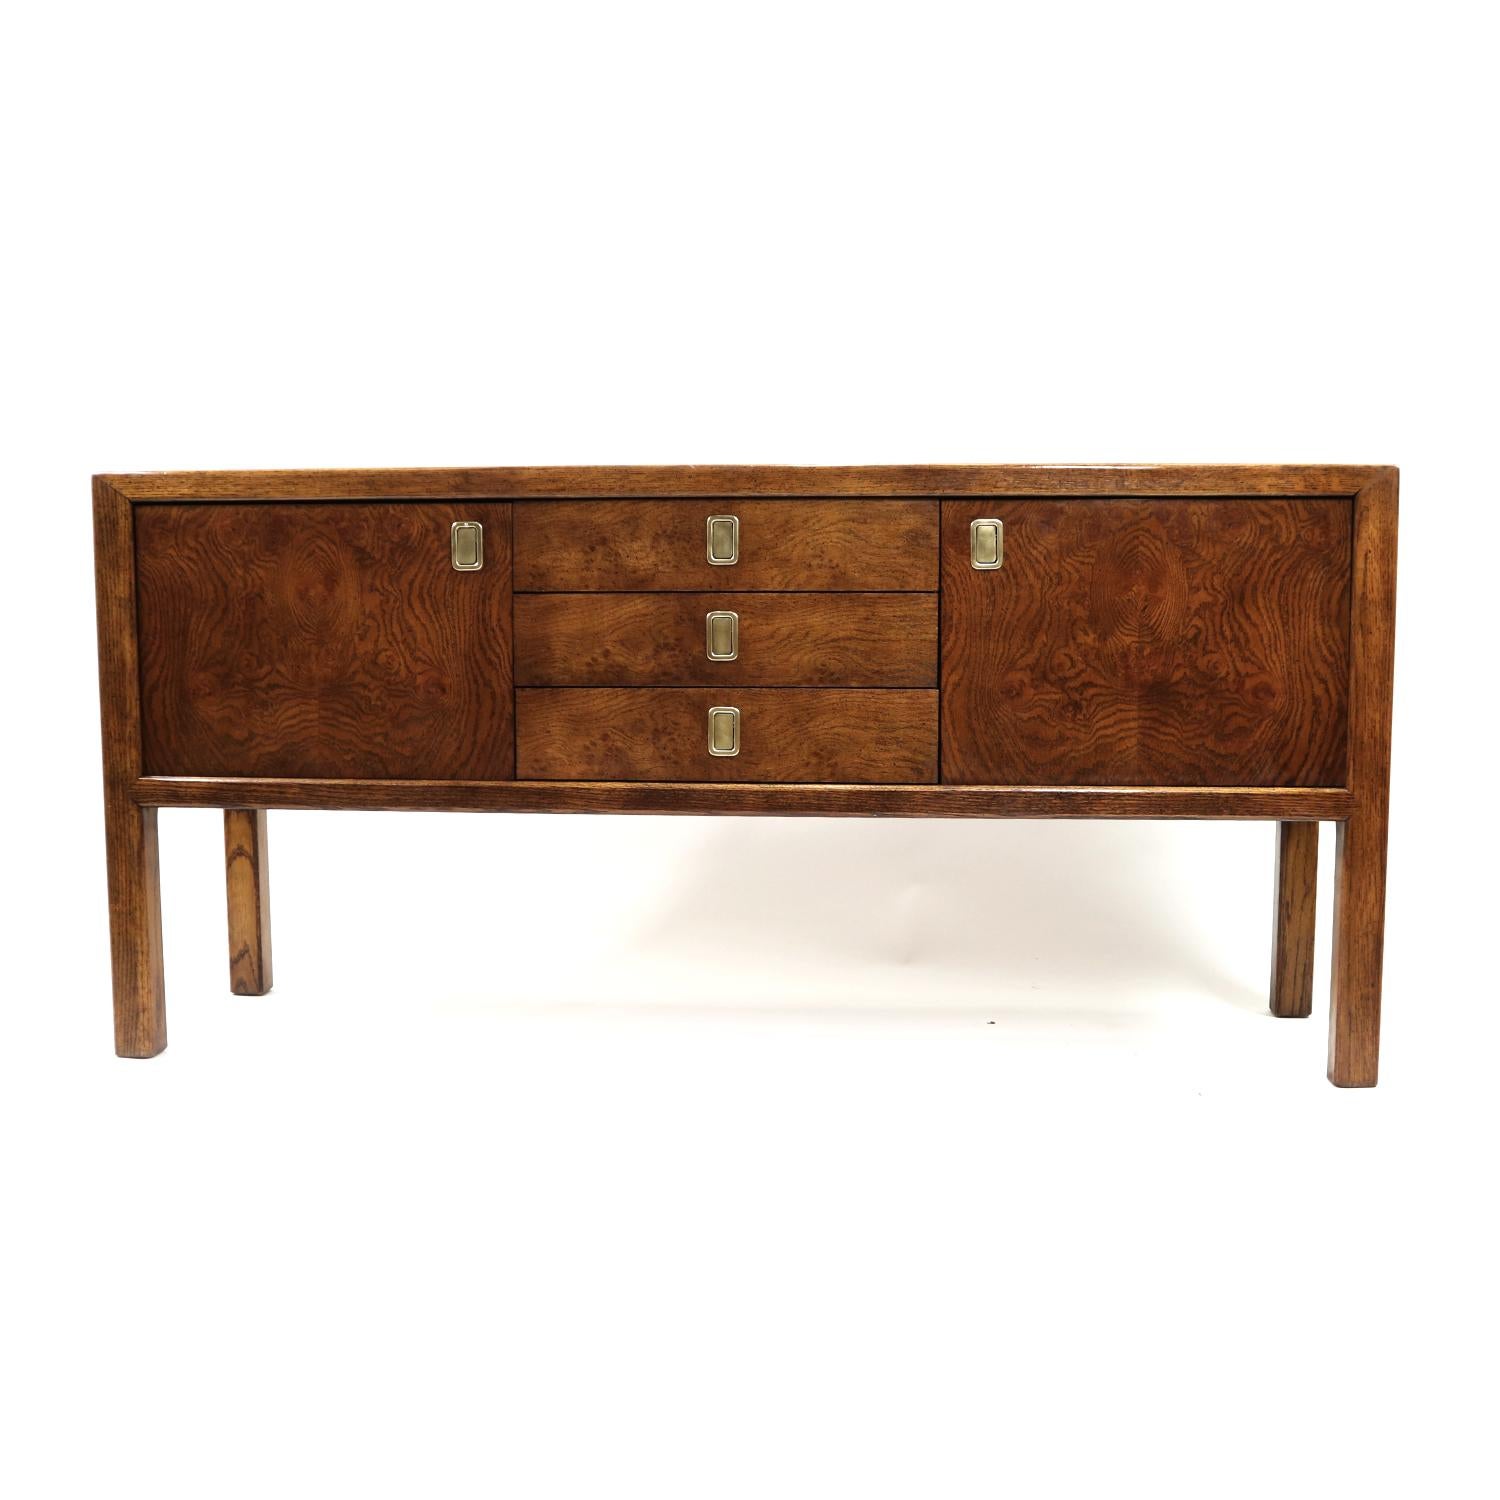 Stunning Campaign style credenza made by esteemed US furniture maker Century, circa 1970s. Mesmerizing burl wood on fronts and top. The brass pull hardware ties together British traditional, modern and Eastern design. We love these low profile, coin